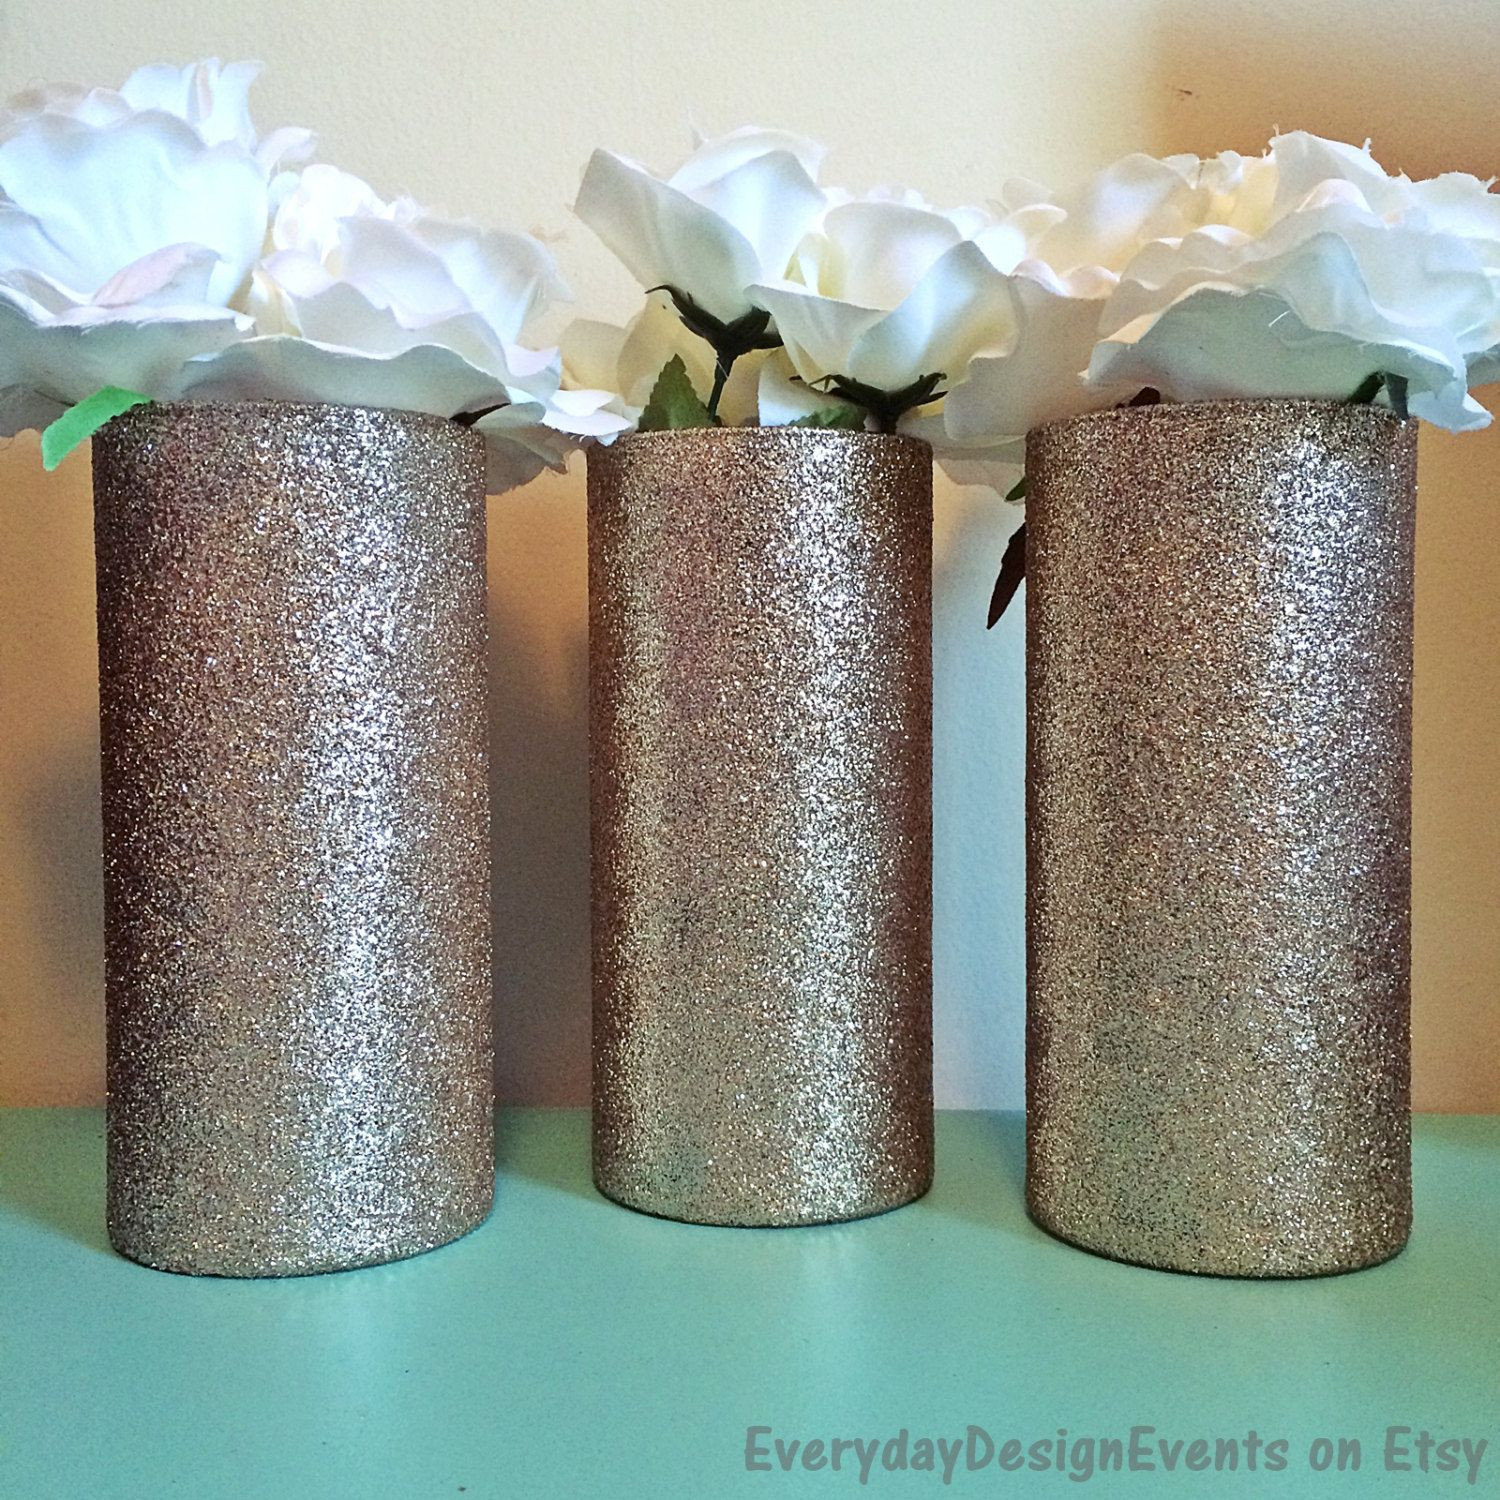 20 Unique Rose Gold Cylinder Vase 2024 free download rose gold cylinder vase of gold cylinder vases image vases disposable plastic single cheap in gold cylinder vases stock 3 champagne gold glass vases gold vases wedding centerpieces gold of g